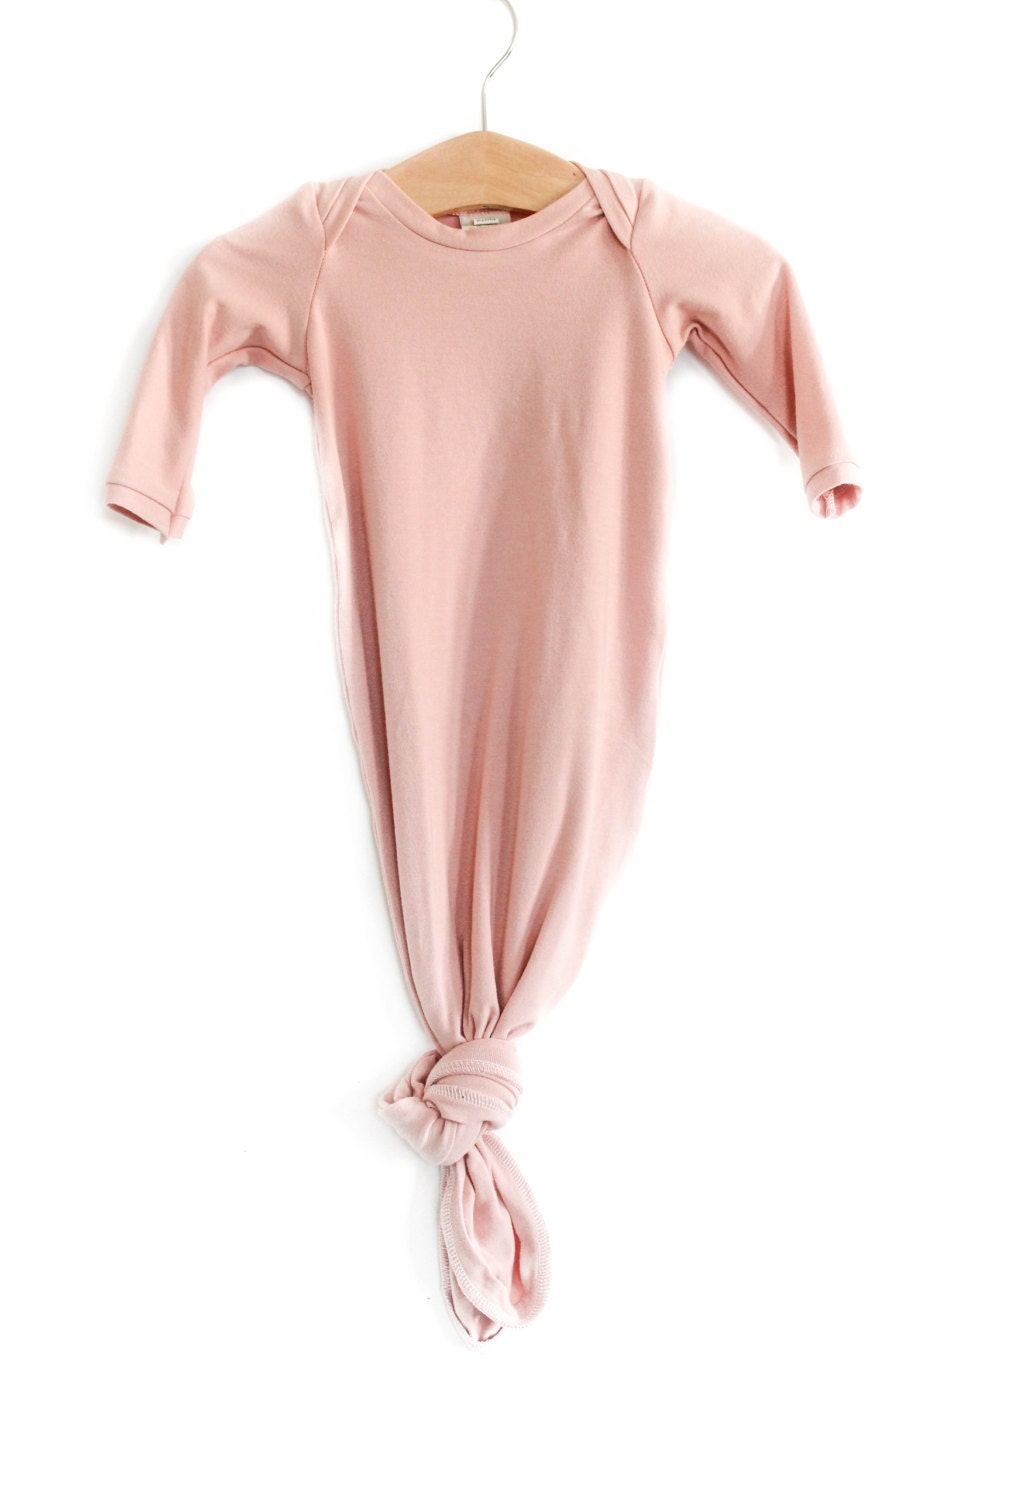 knotted sleeper baby girl gown baby gown coming home